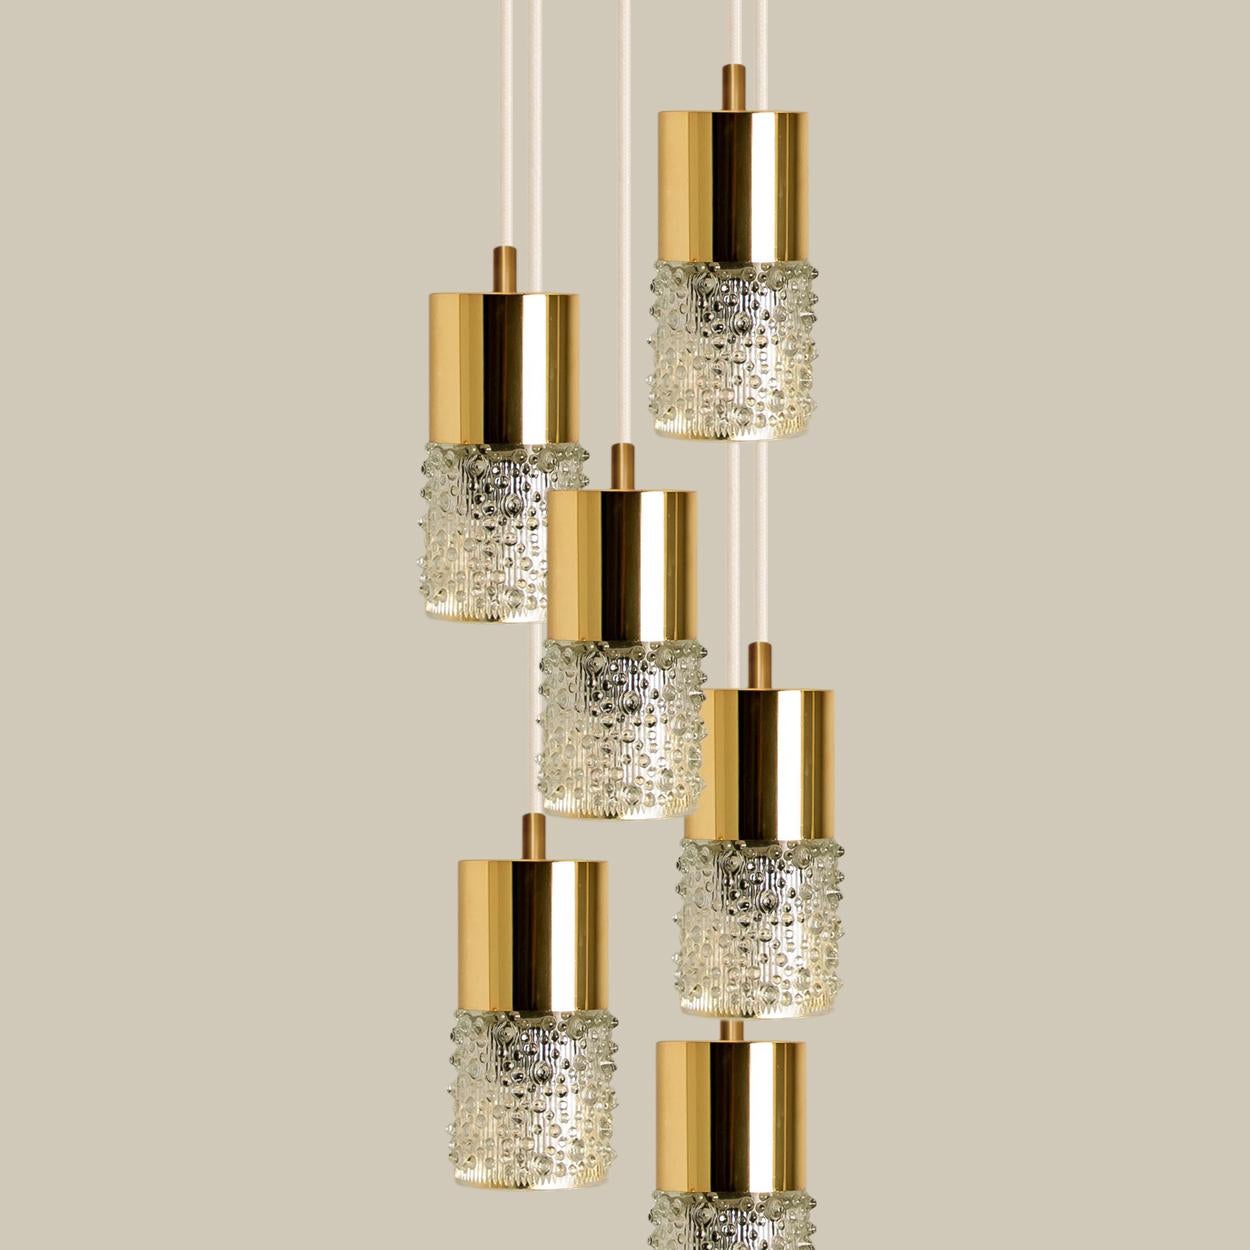 Pressed Glass and Brass Pendant Lights, 1970s For Sale 4